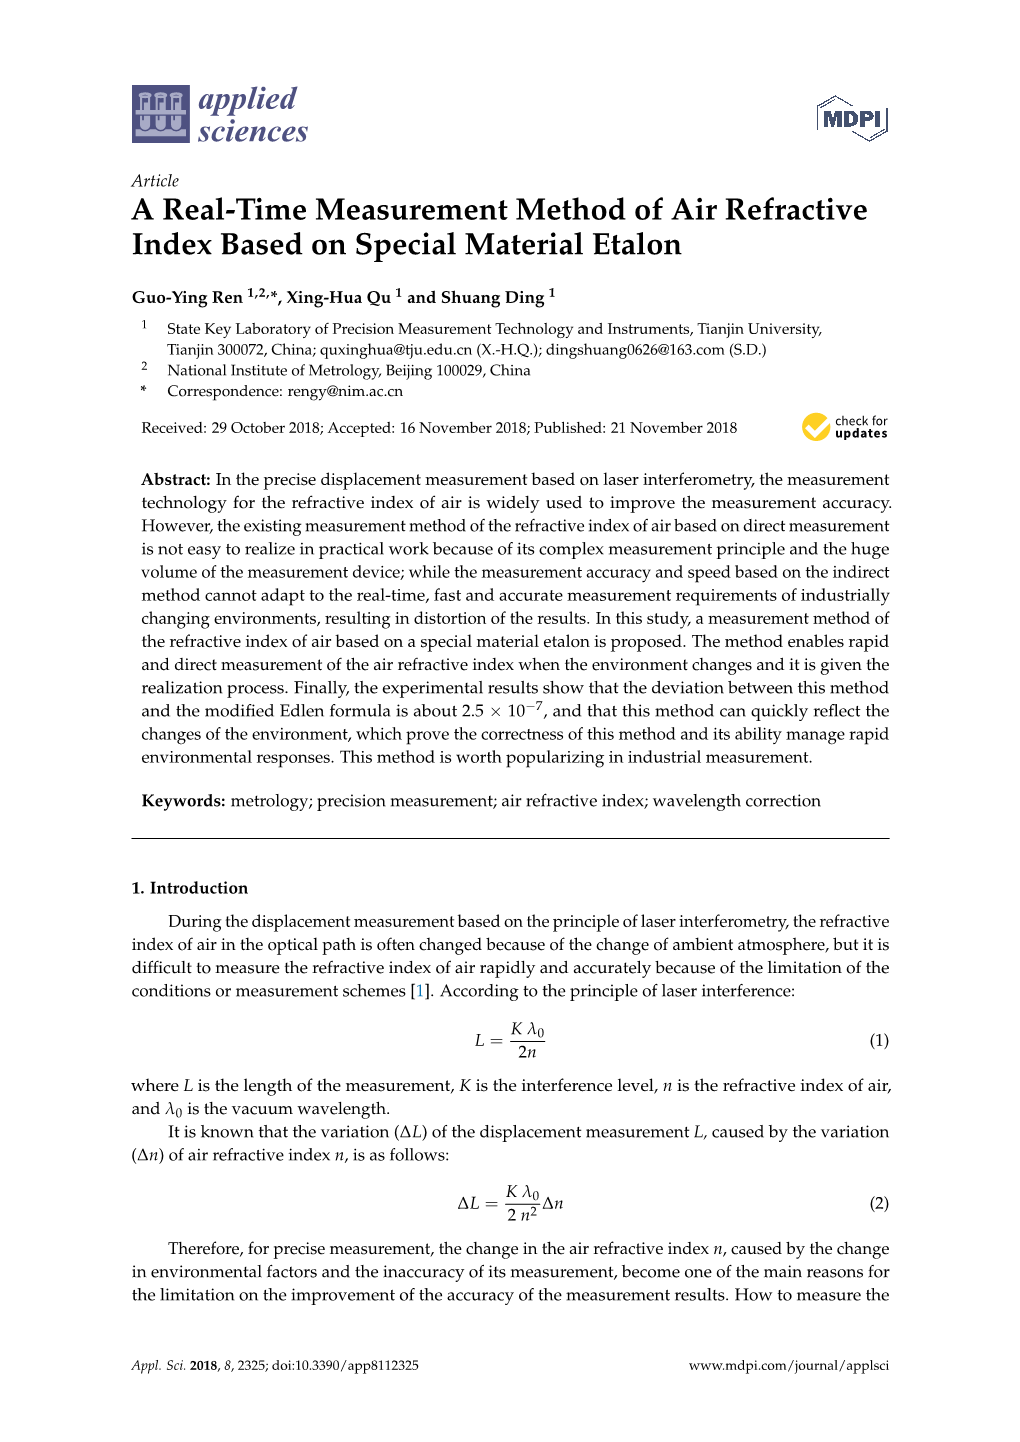 A Real-Time Measurement Method of Air Refractive Index Based on Special Material Etalon